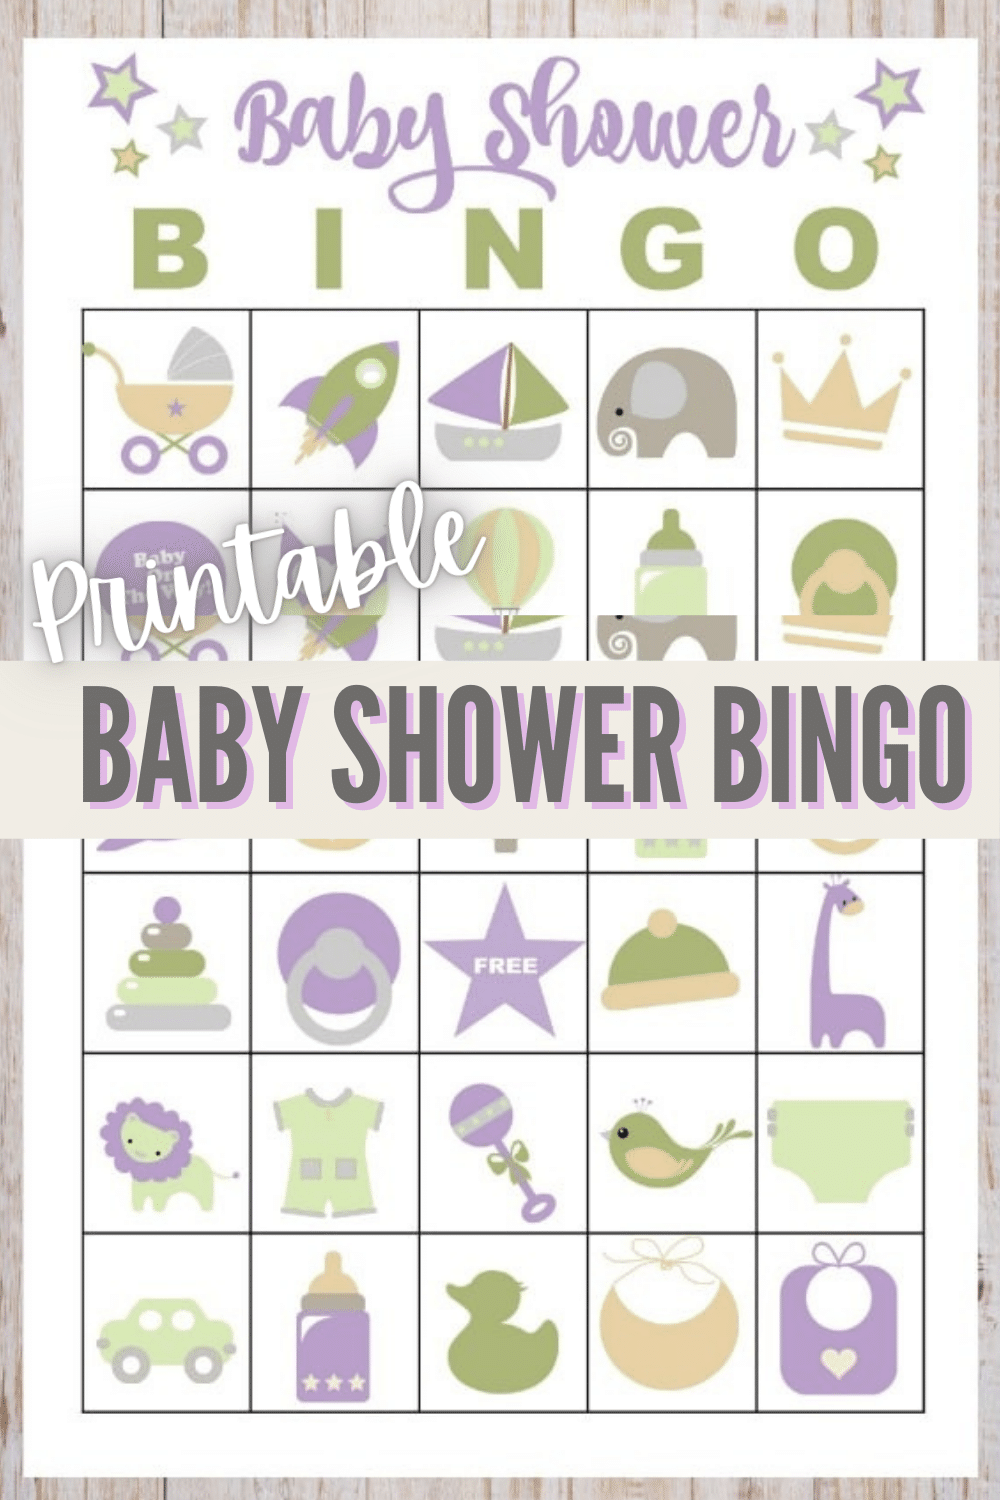 These free printable baby shower bingo cards are gender neutral and make any baby shower more fun. You can download six different bingo cards for the party. #freeprintables #bingo #babyshower via @wondermomwannab